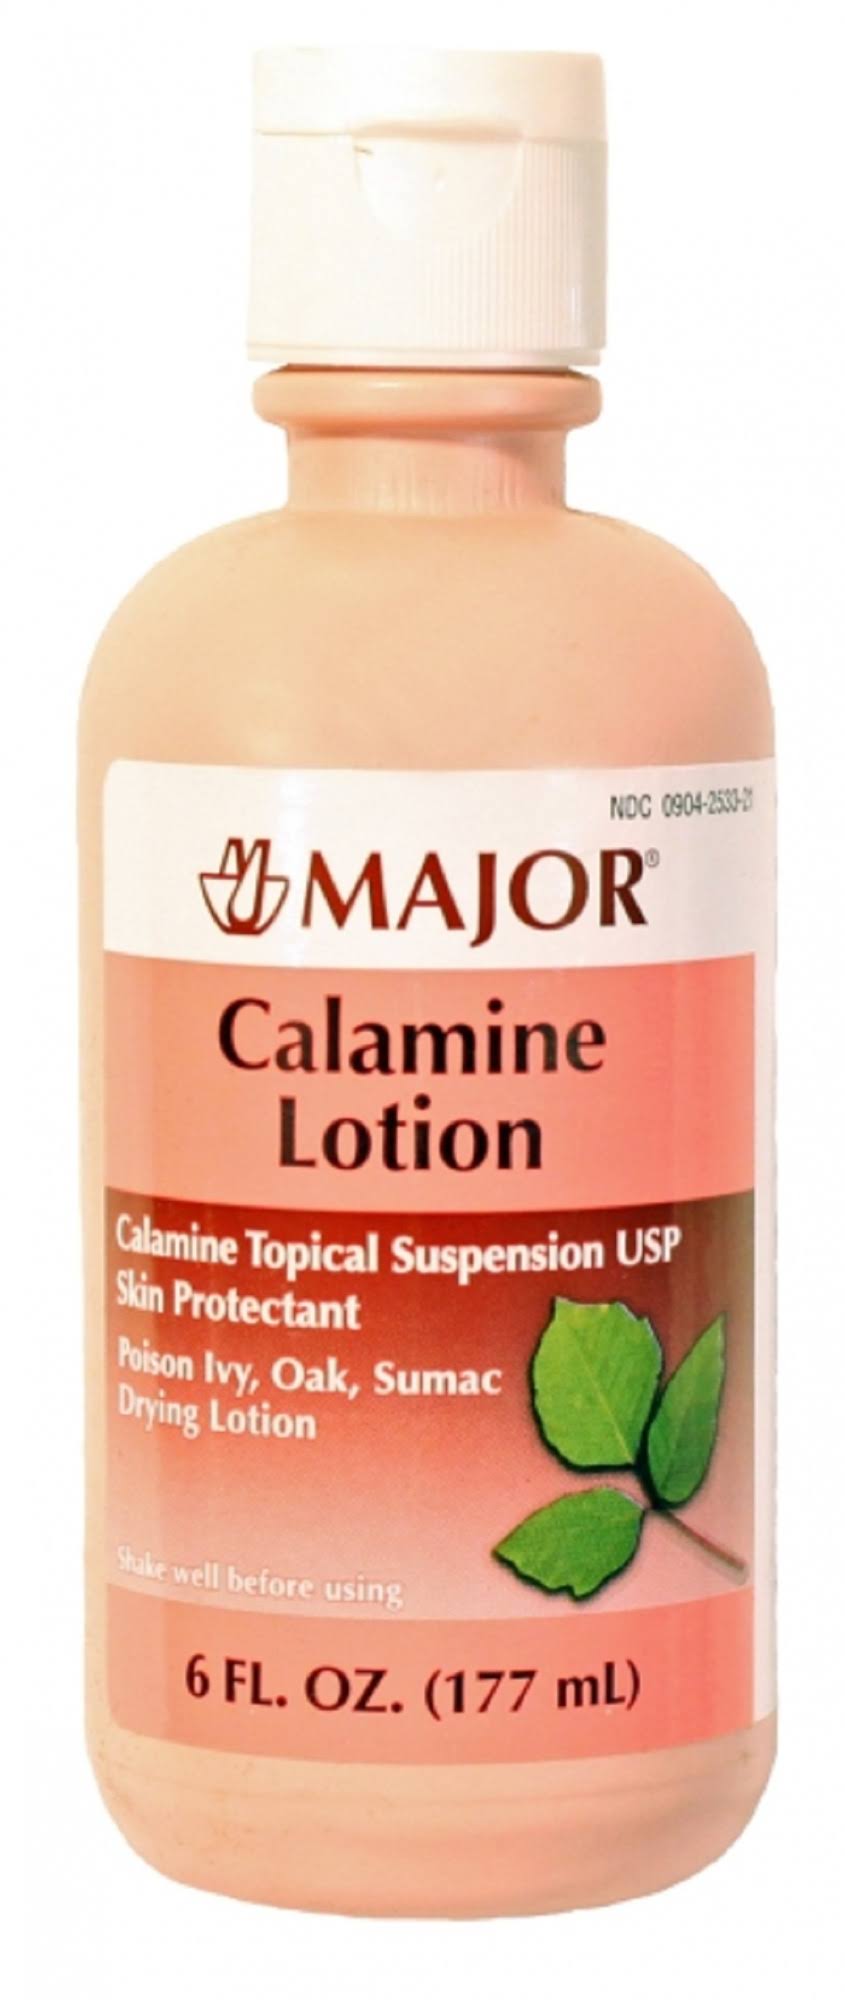 Calamine Drying Lotion Topical Suspension Usp Skin Protectant - 6oz